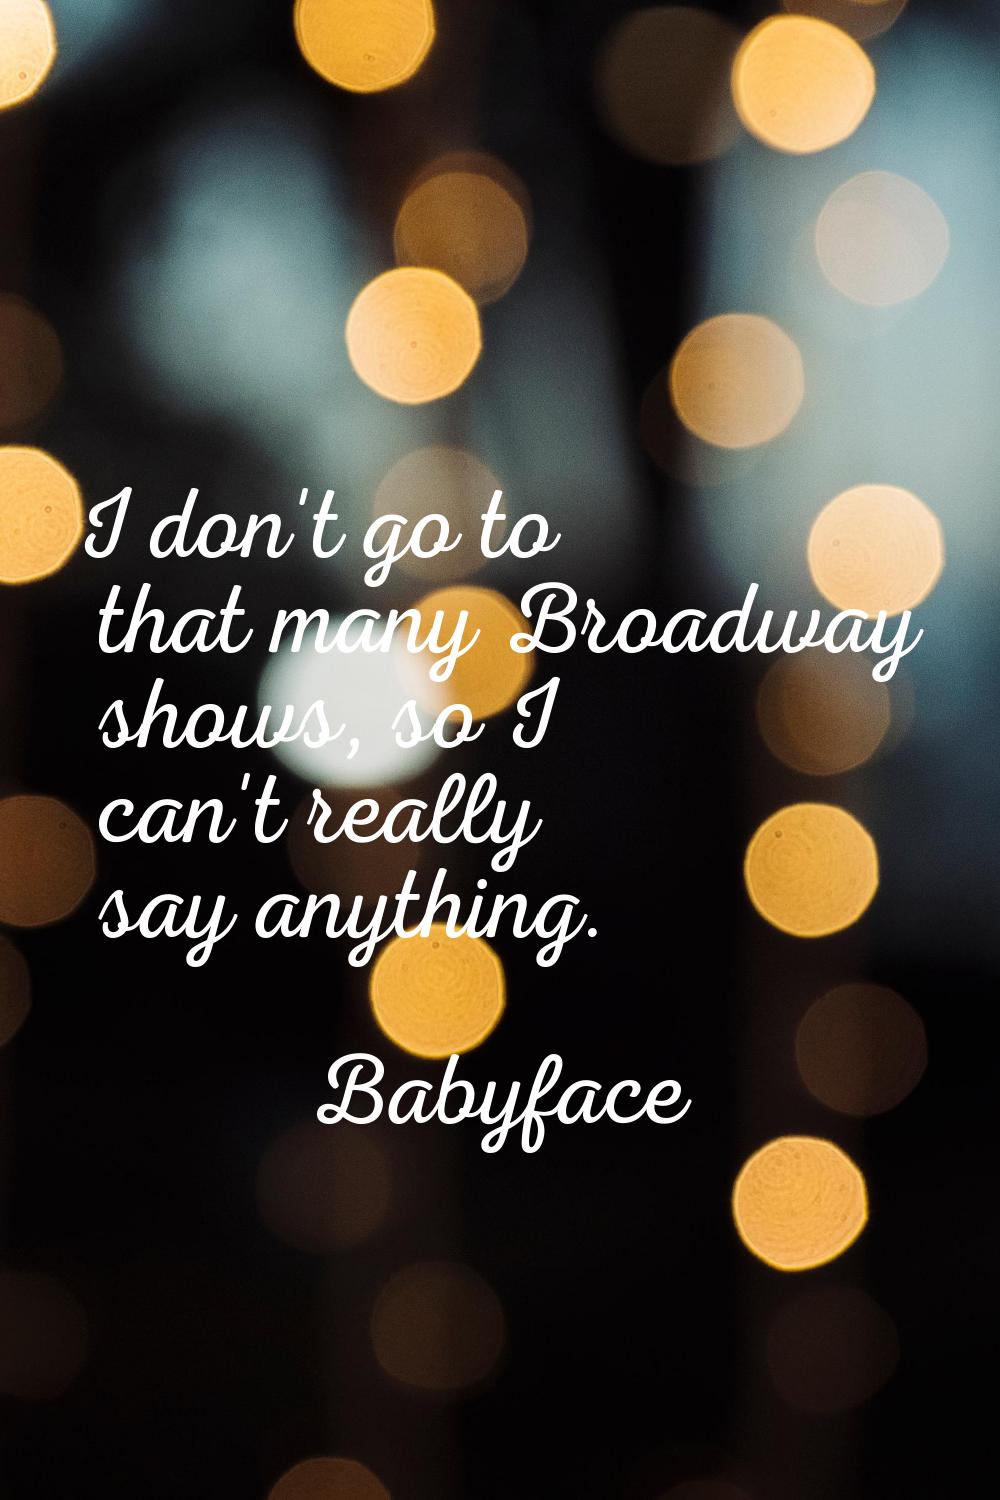 I don't go to that many Broadway shows, so I can't really say anything.